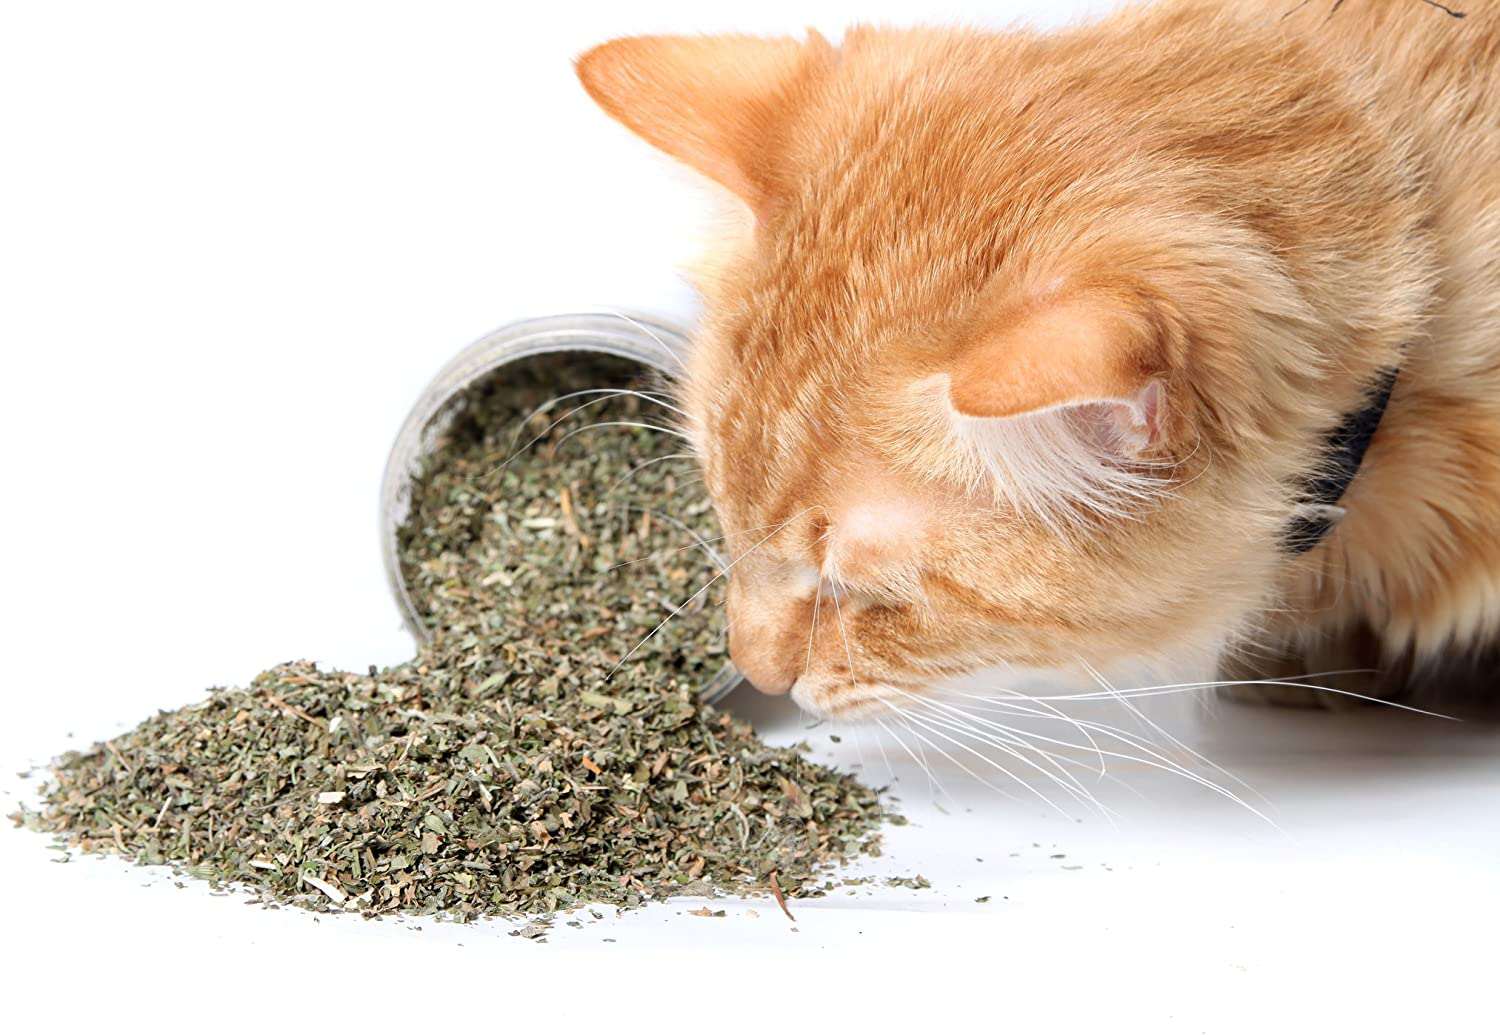 Cat Crack Catnip, Premium Blend Safe for Cats, Infused with Maximum Potency Your Kitty Is Sure to Go Crazy For